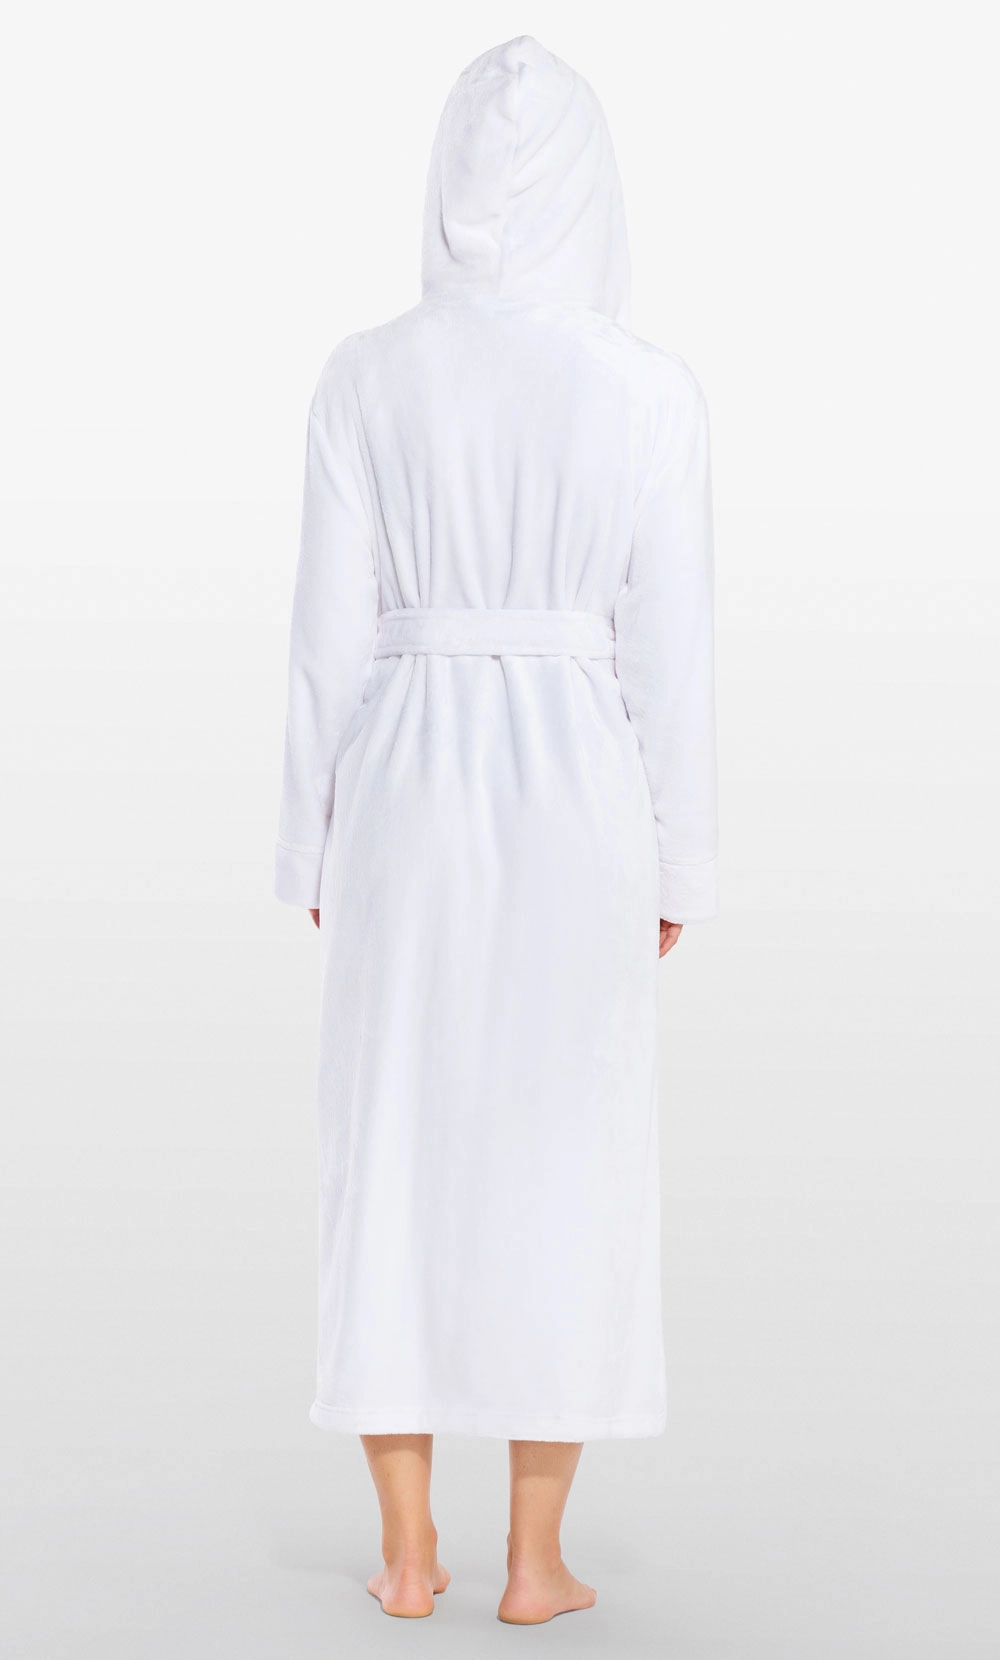 Duluth Tading White Dang Soft Space Robe Women's Size Medium New